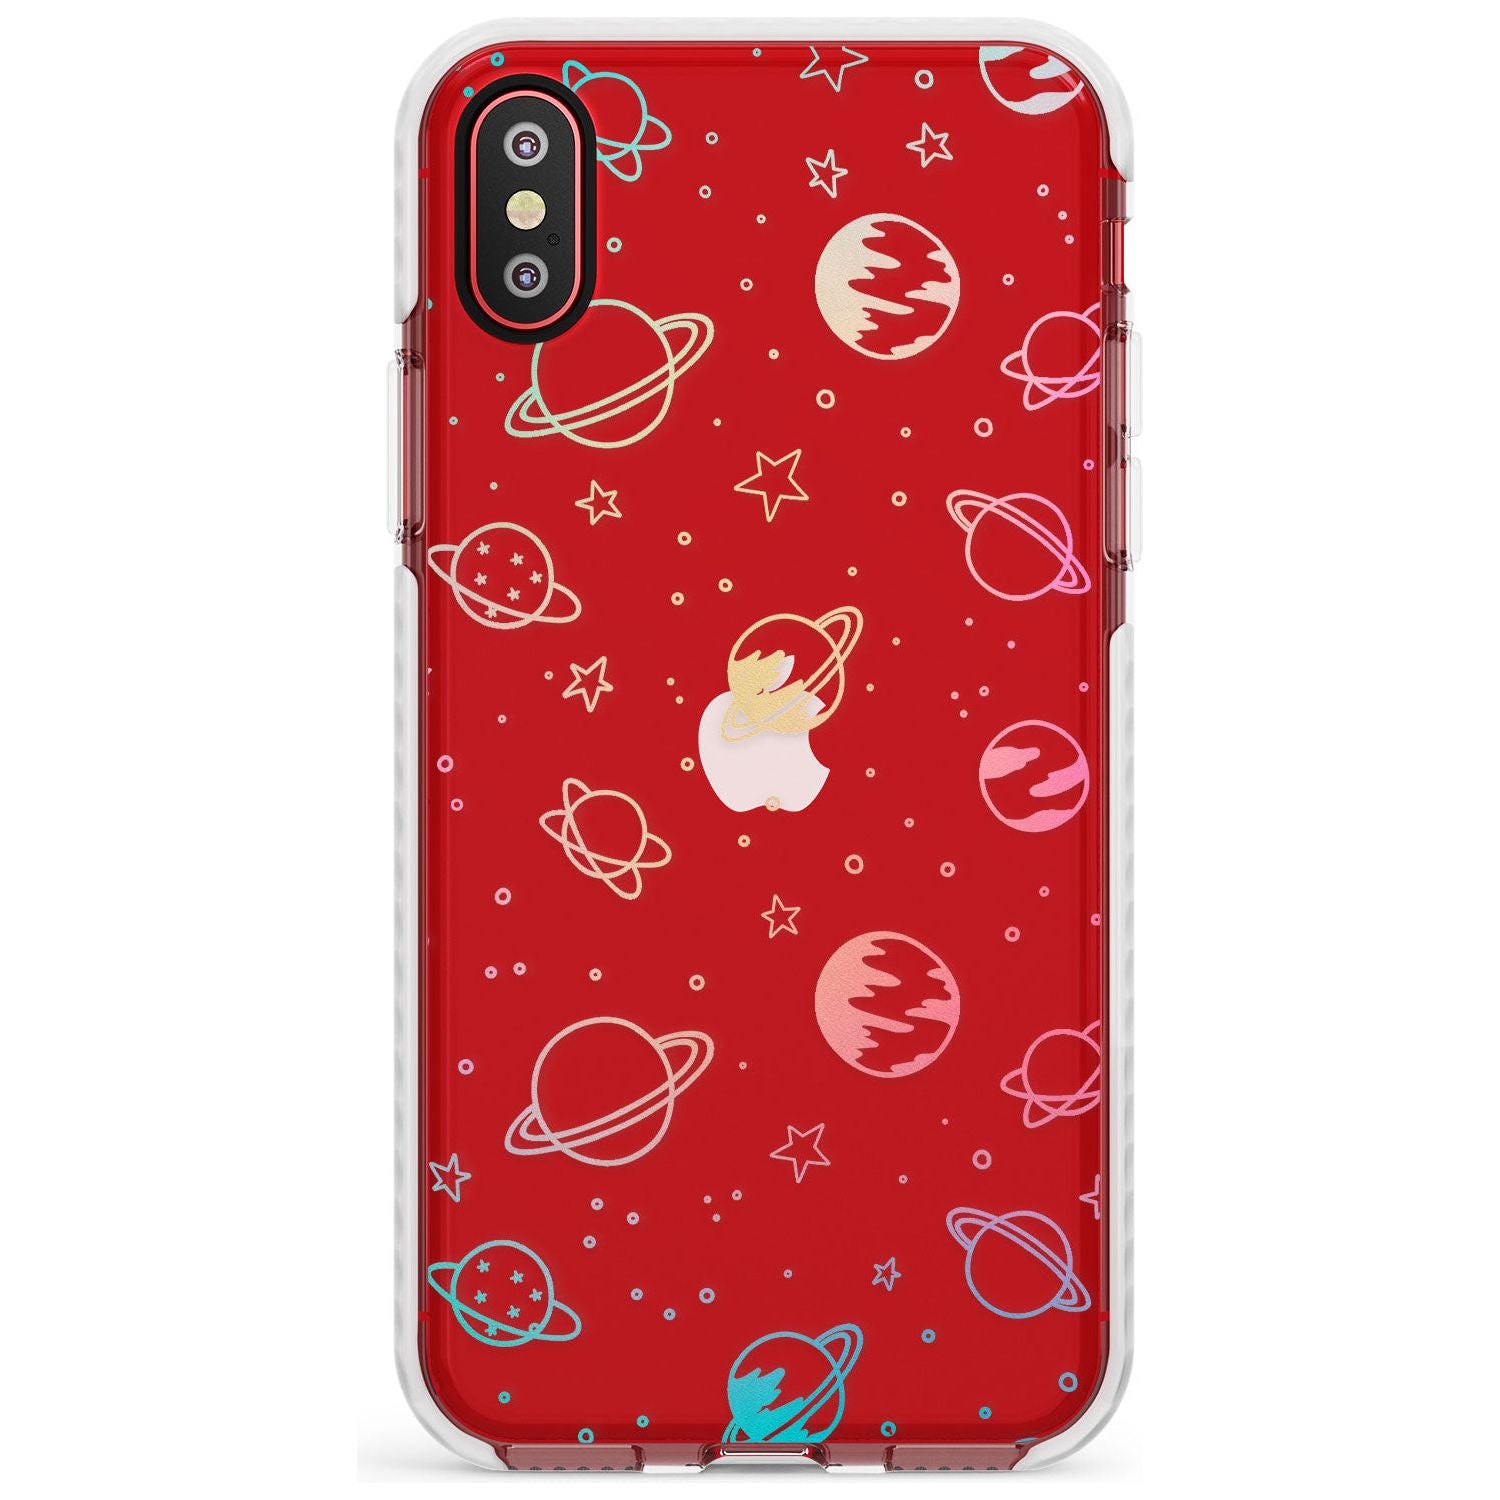 Outer Space Outlines: Pastels on Clear Slim TPU Phone Case Warehouse X XS Max XR